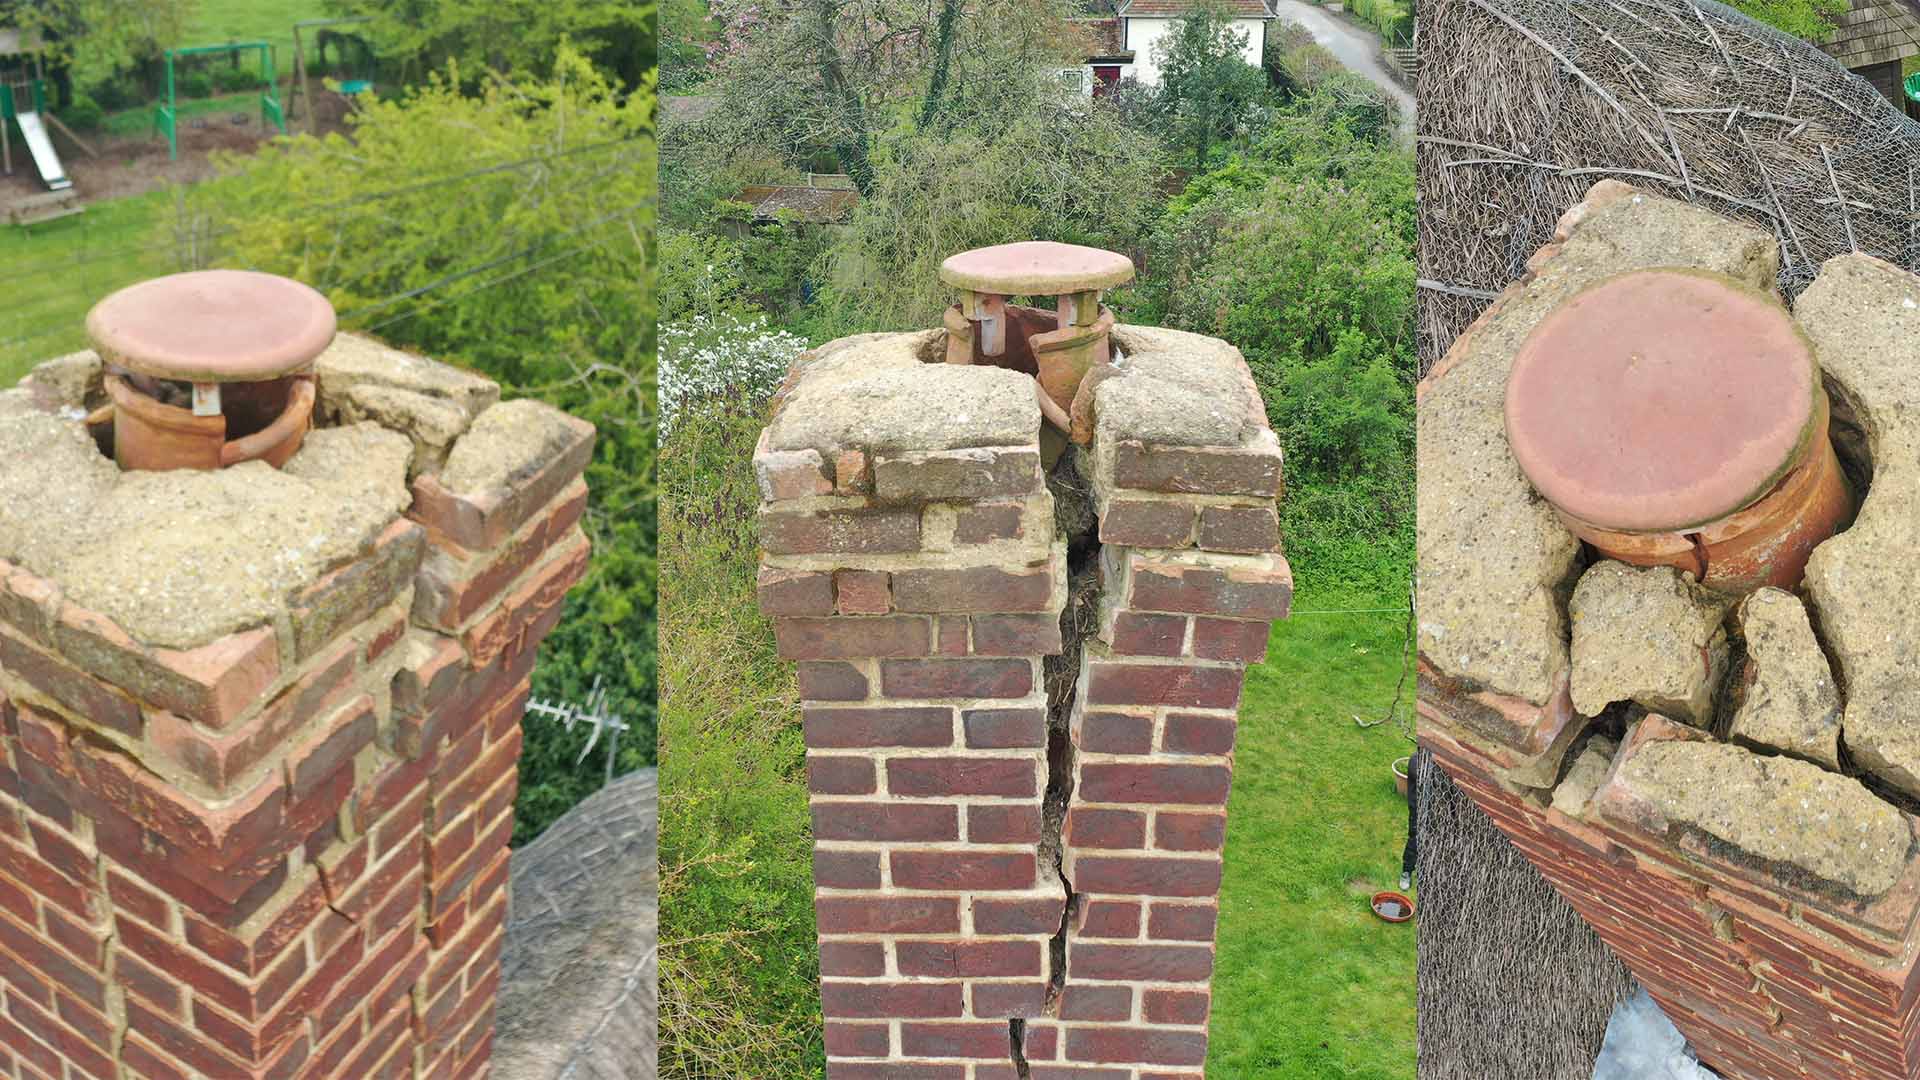 Drone Inspection Services: A Case Study on Chimney Damage Assessment for Insurance Loss Adjusters